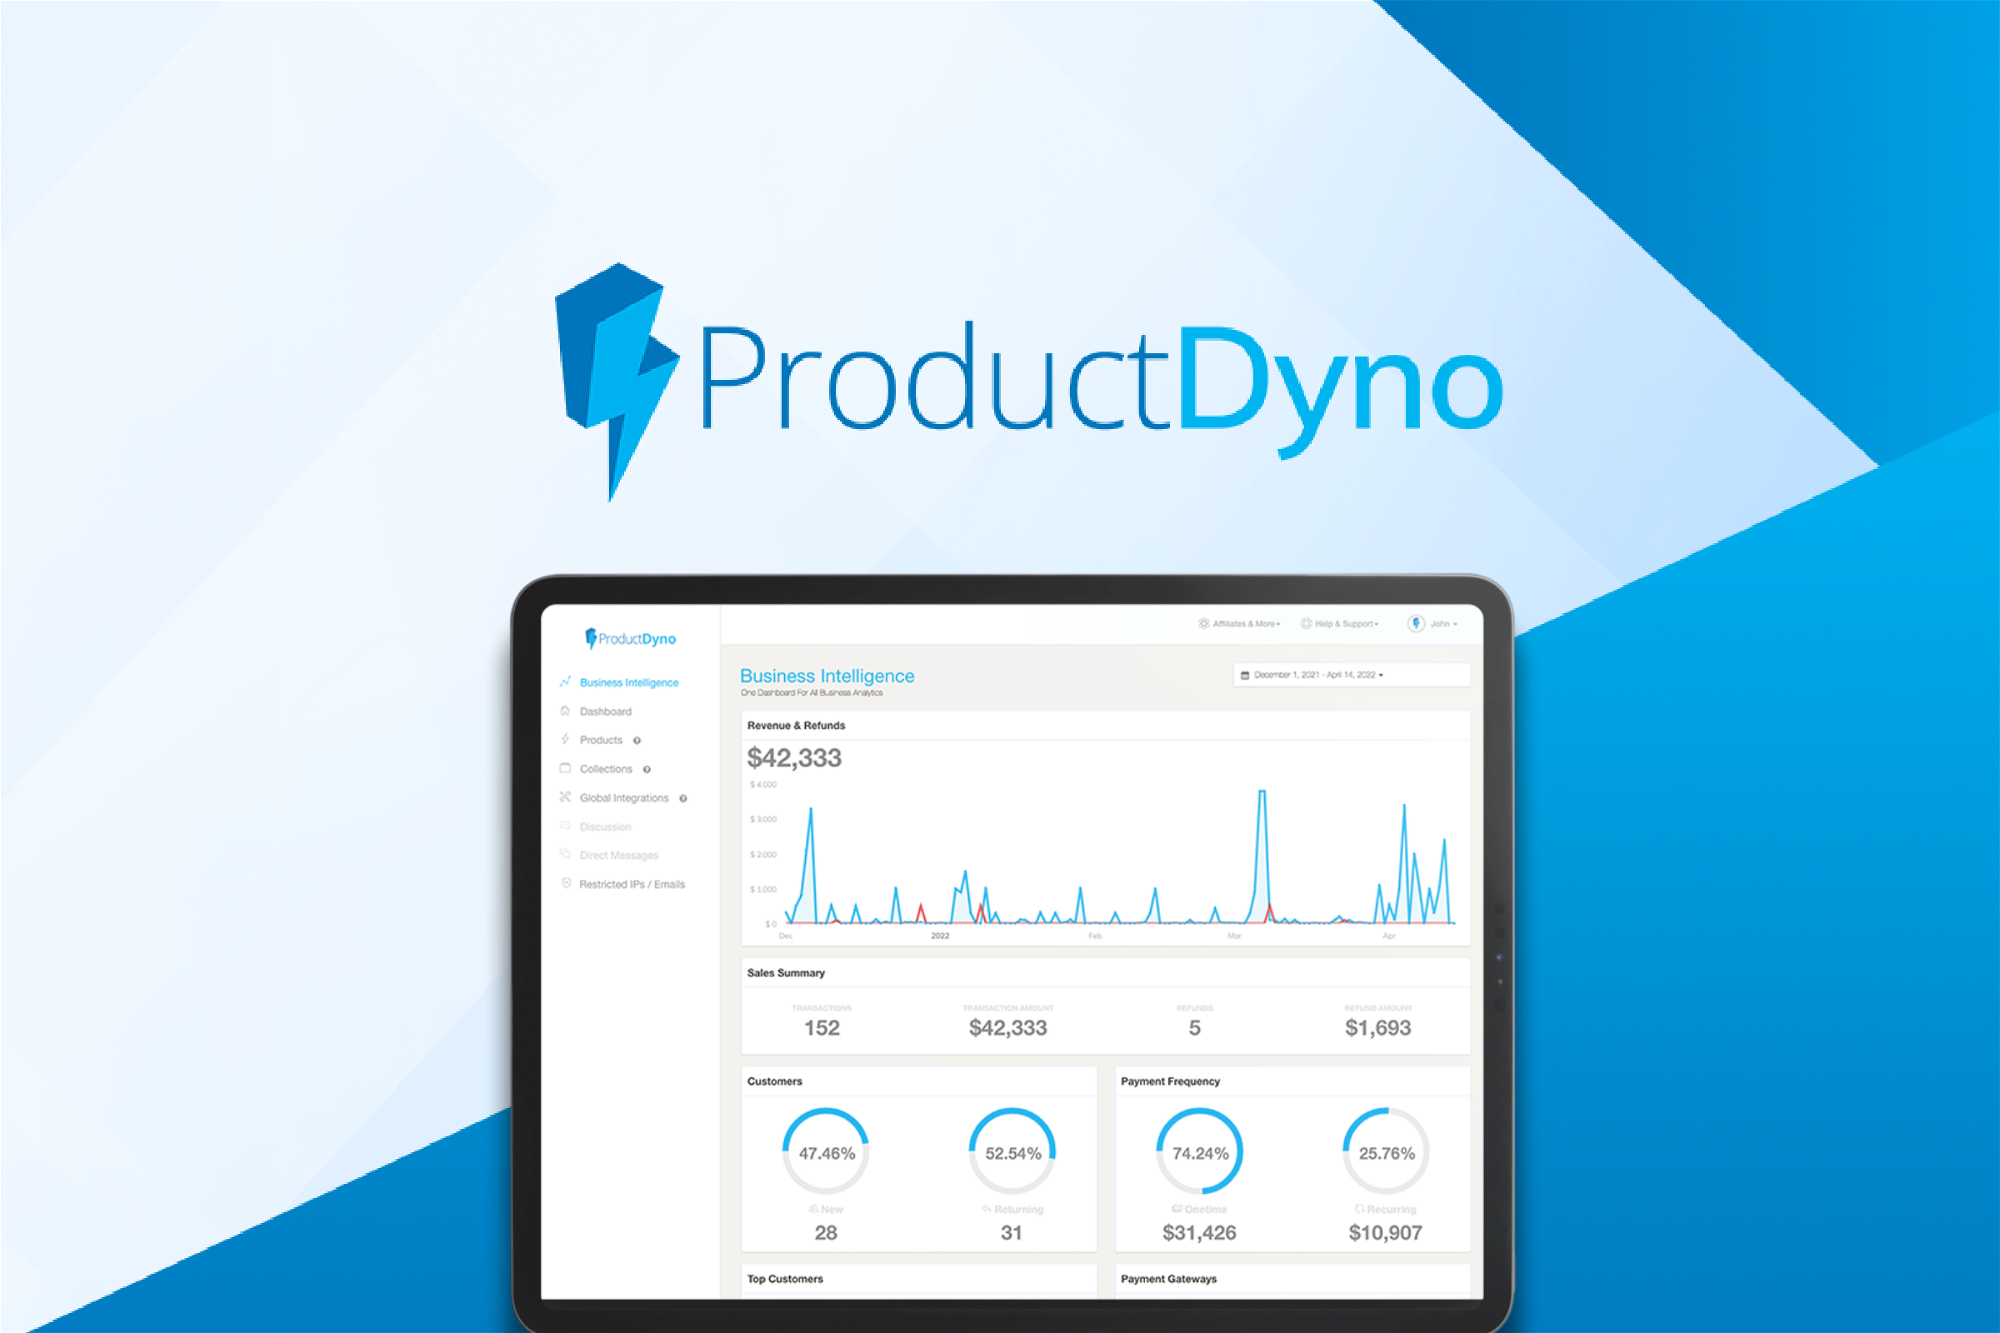 ProductDyno - Create and sell digital products | AppSumo